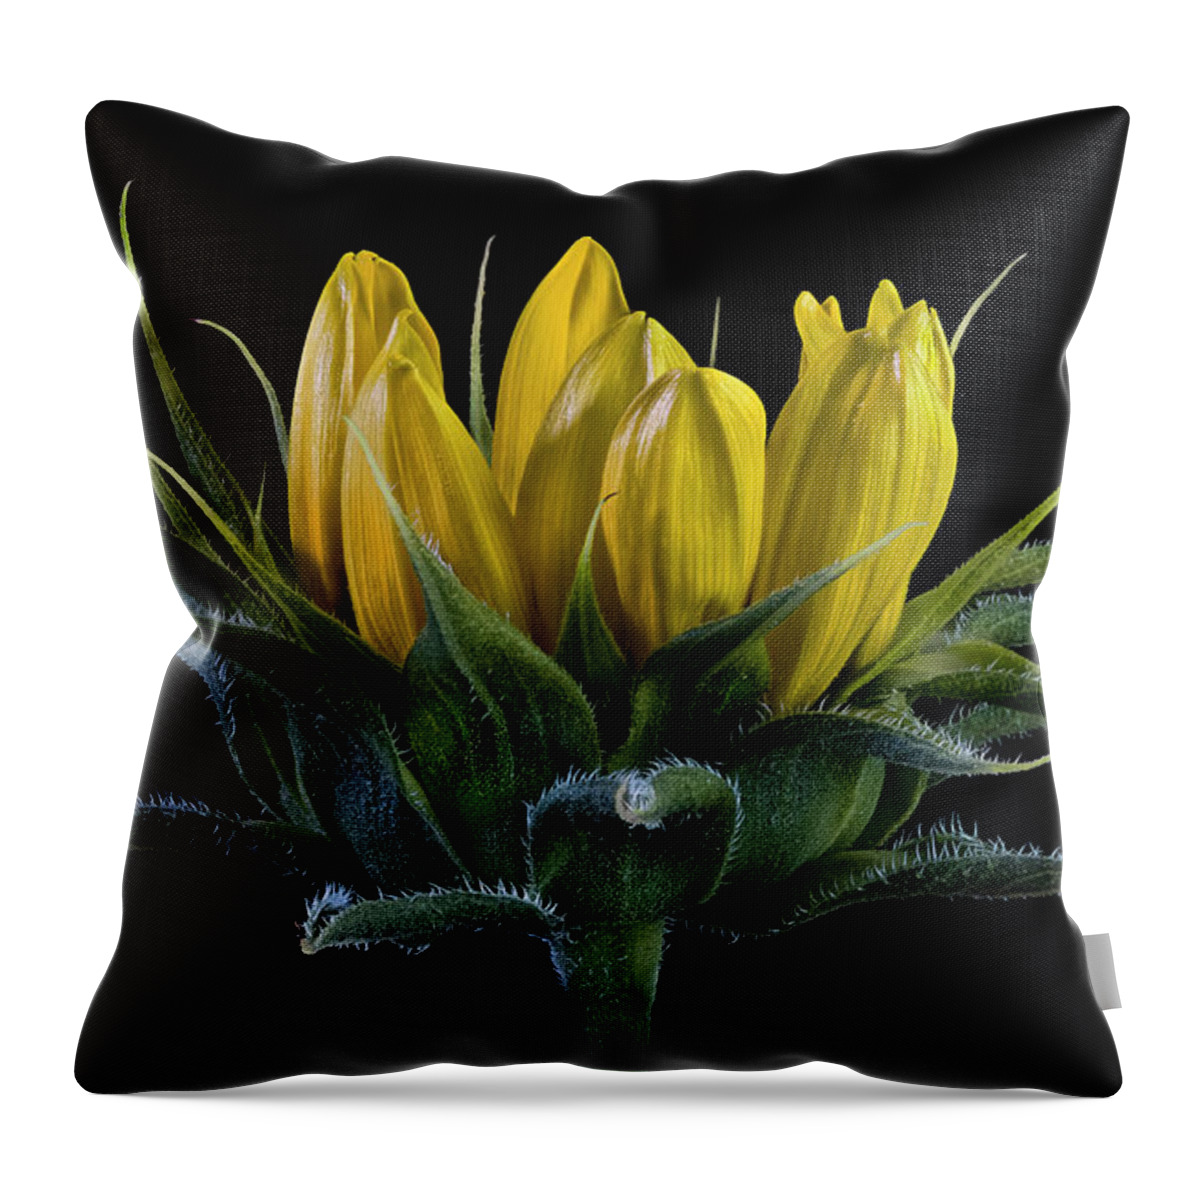 Wild Sunflower Bud Throw Pillow featuring the photograph Wild Sunflower Bud by Endre Balogh